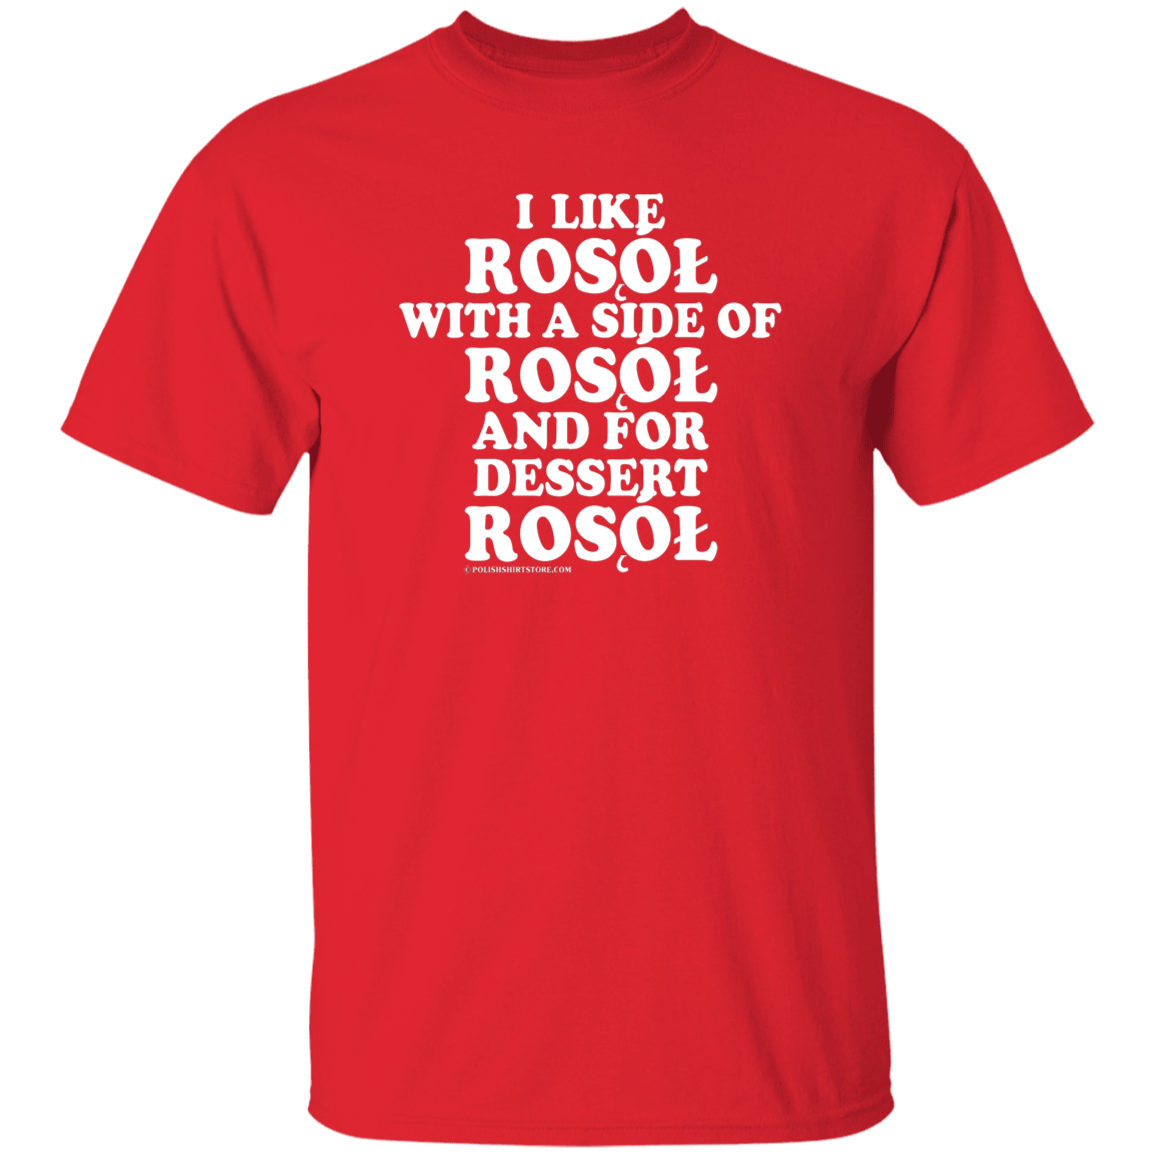 Rosol With A Side Of Rosol Apparel CustomCat G500 5.3 oz. T-Shirt Red S